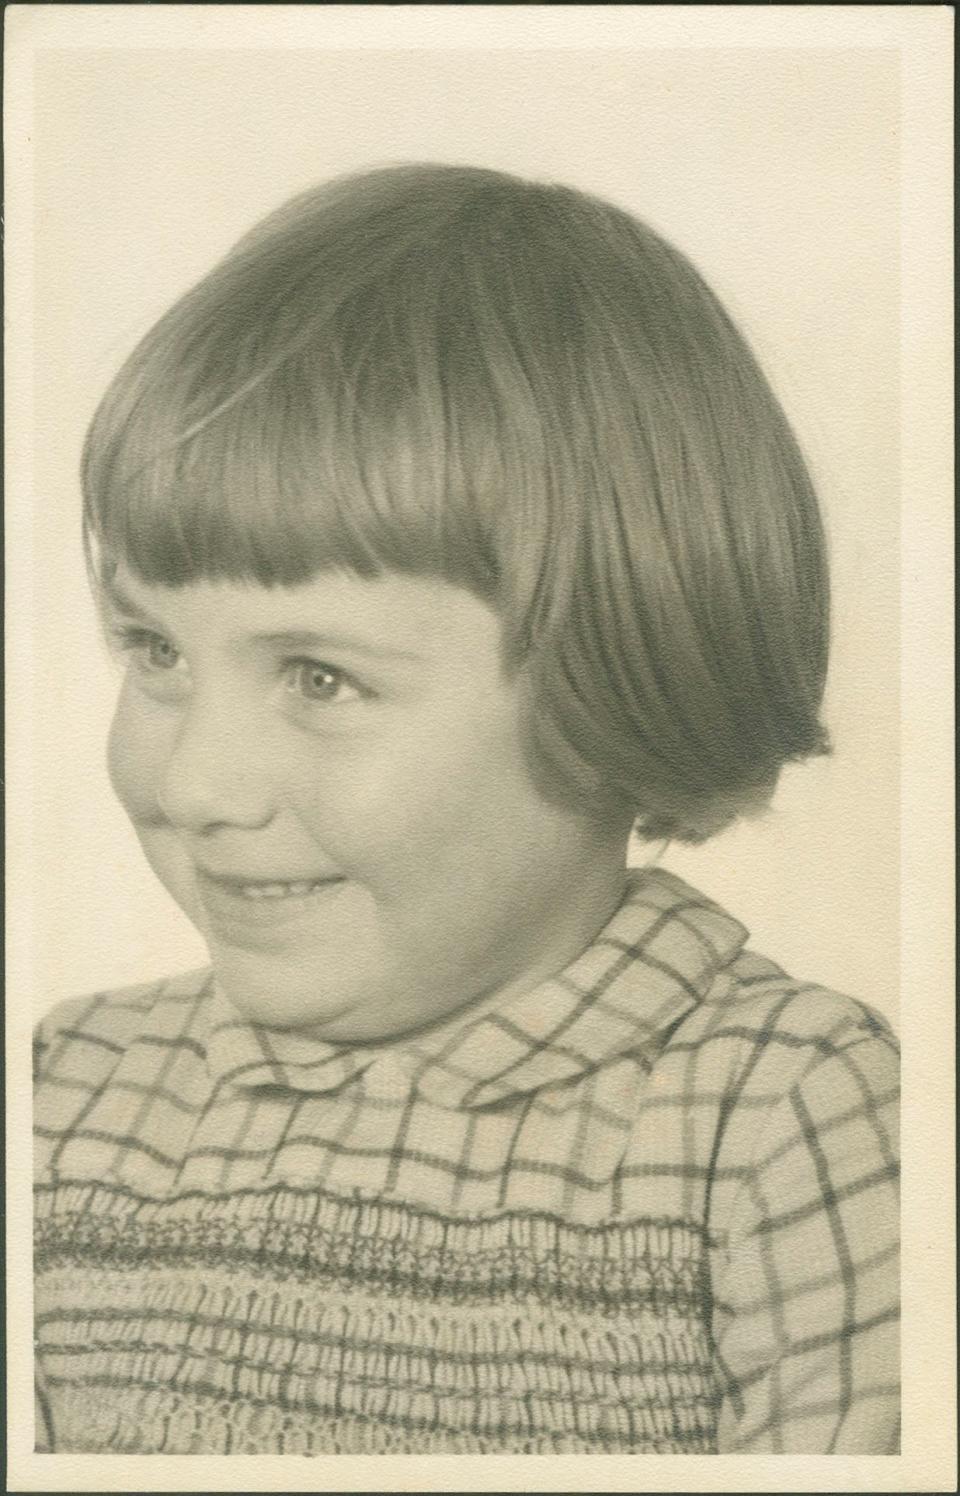 A young Victoria Wood at primary schoolThe Victoria Wood Archive